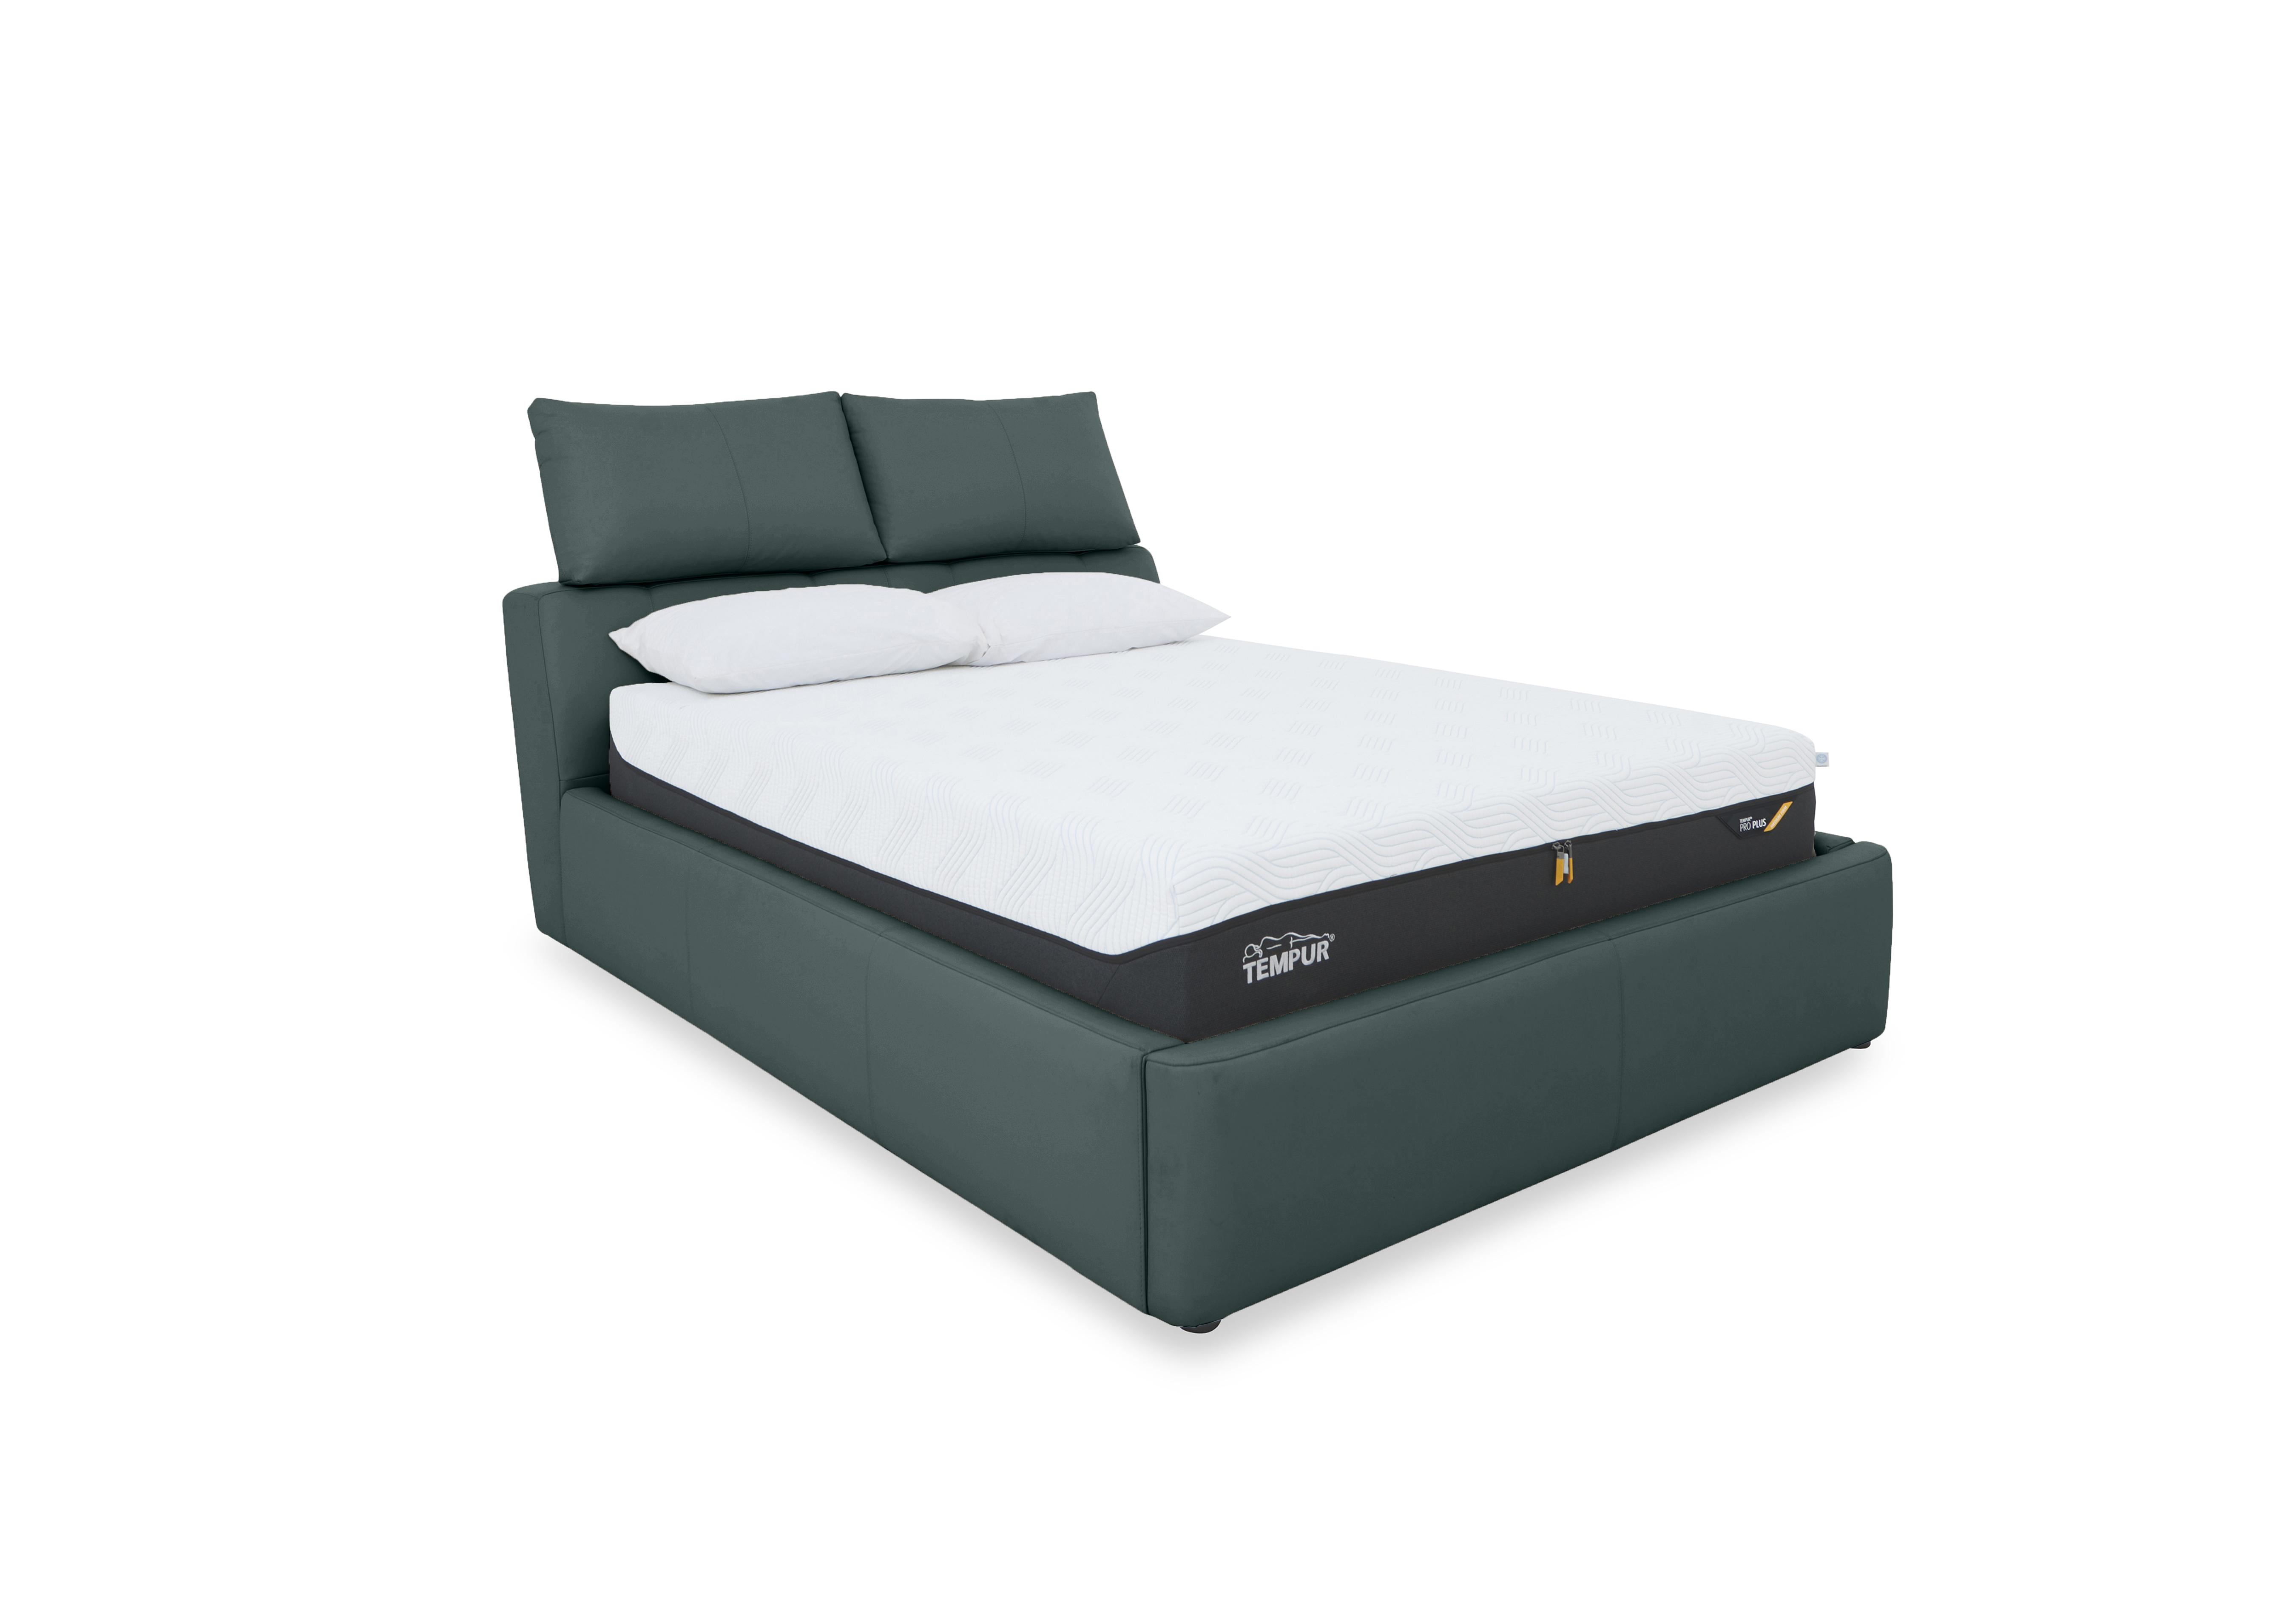 Tyrell Leather Manual Ottoman Bed Frame in Bv-301e Lake Green on Furniture Village